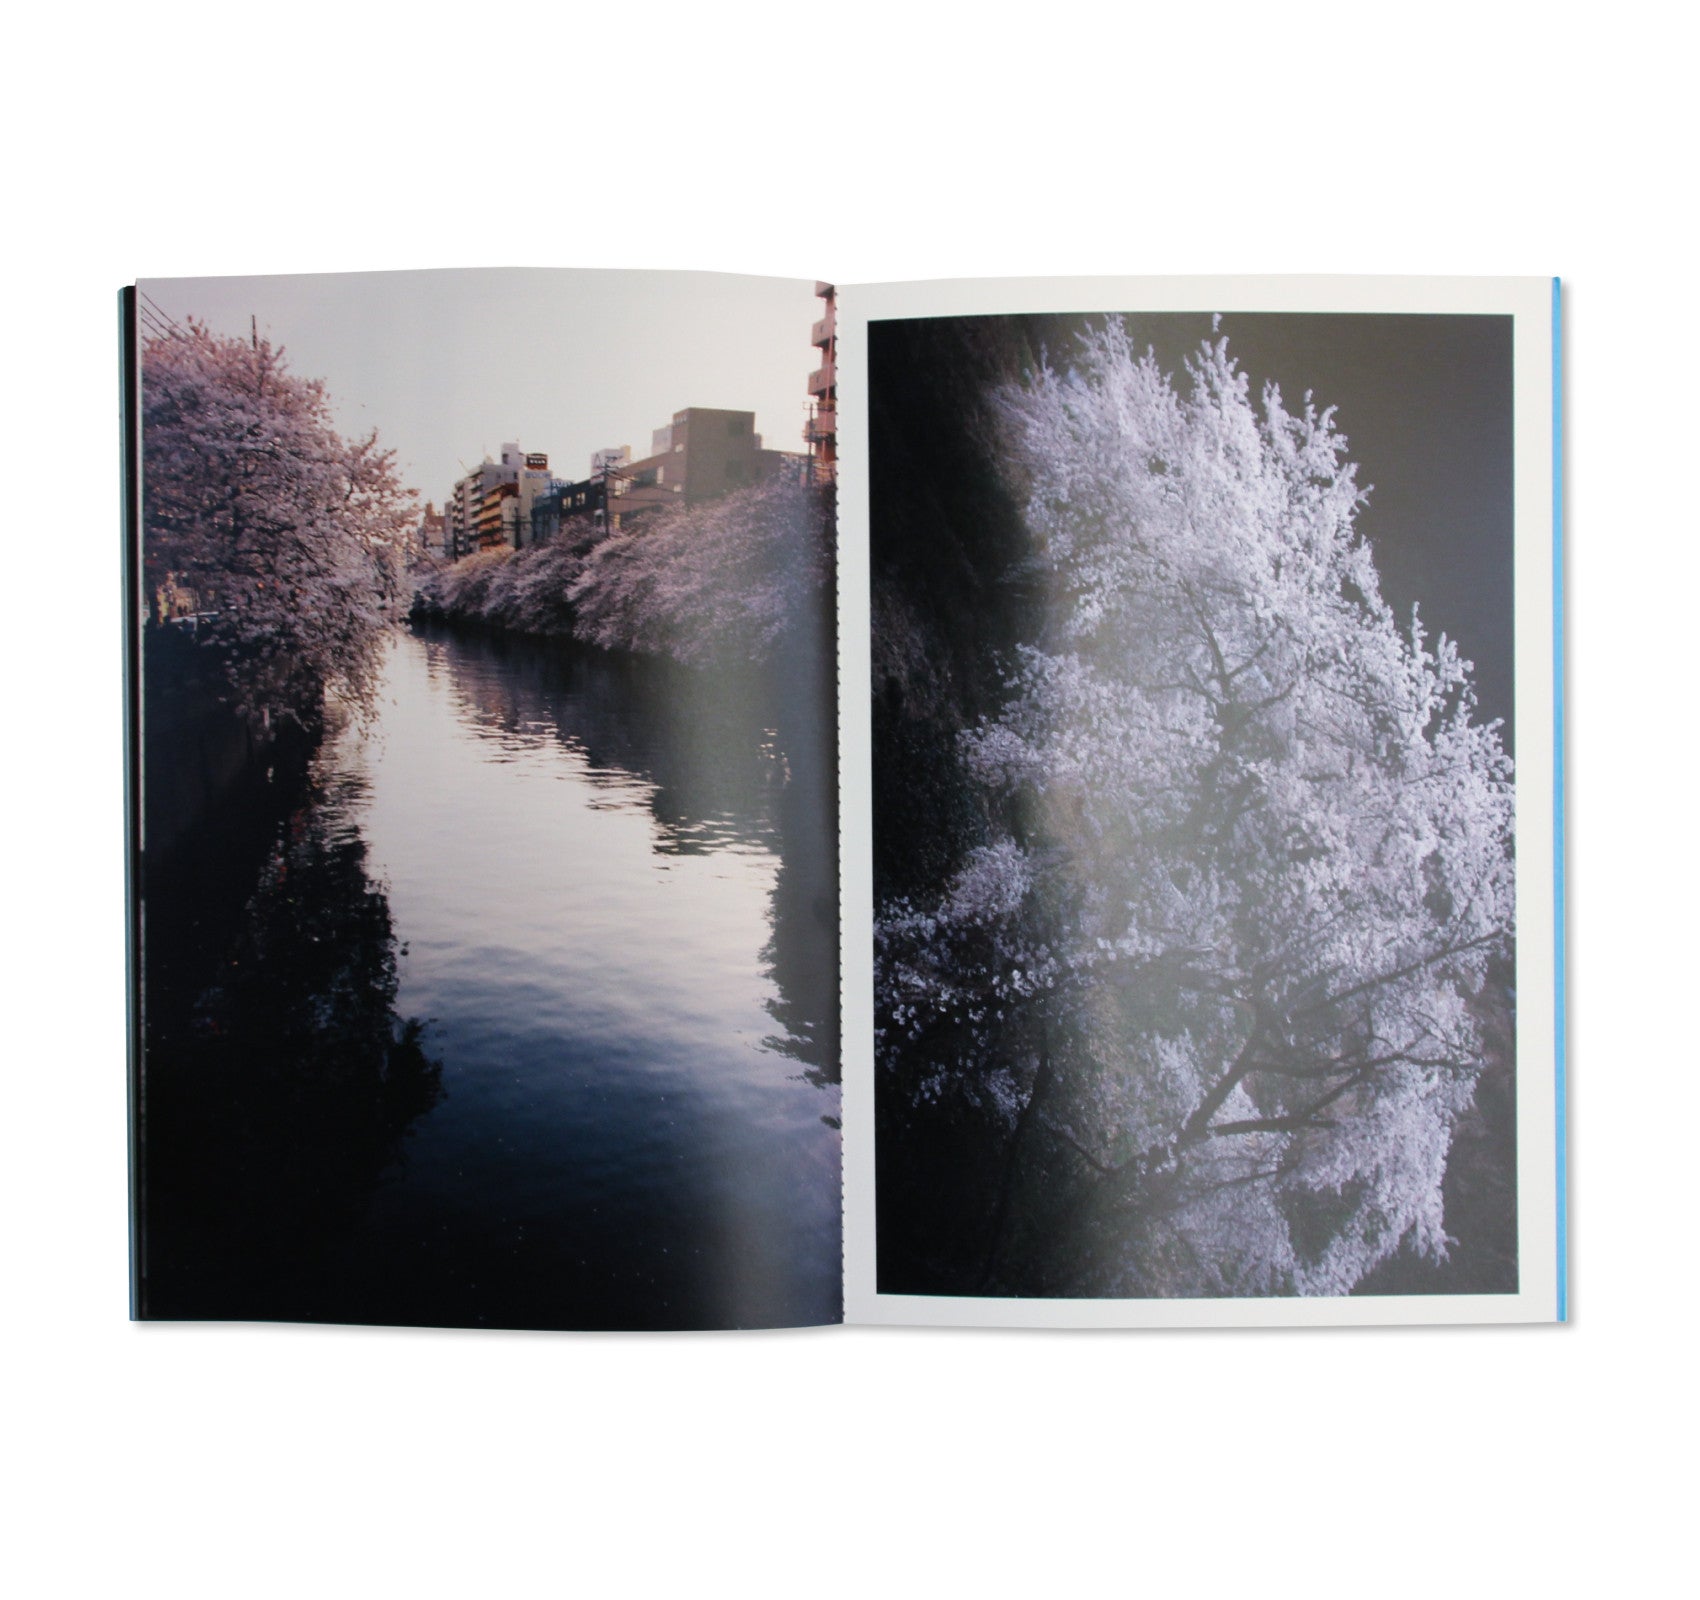 DROP OF LIGHT TO RUSHING WATER by Keiko Nomura [SIGNED]